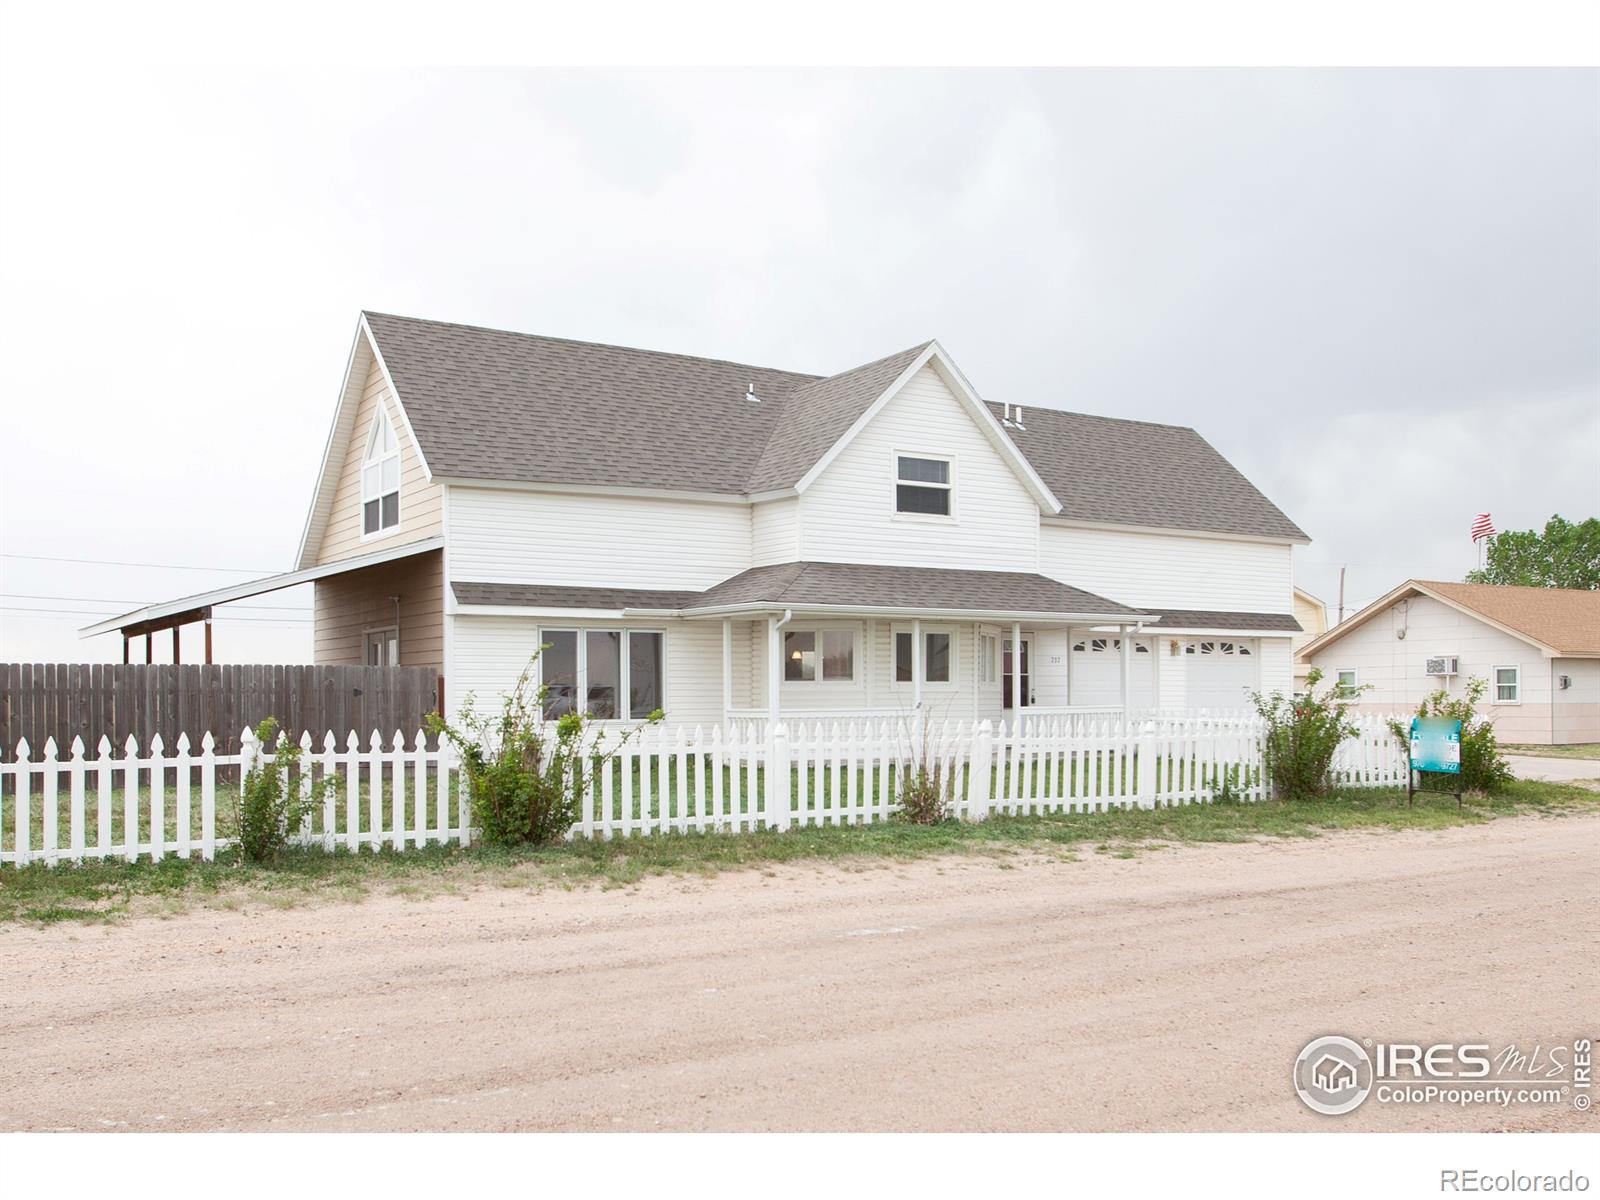 737 7th, Sterling, CO